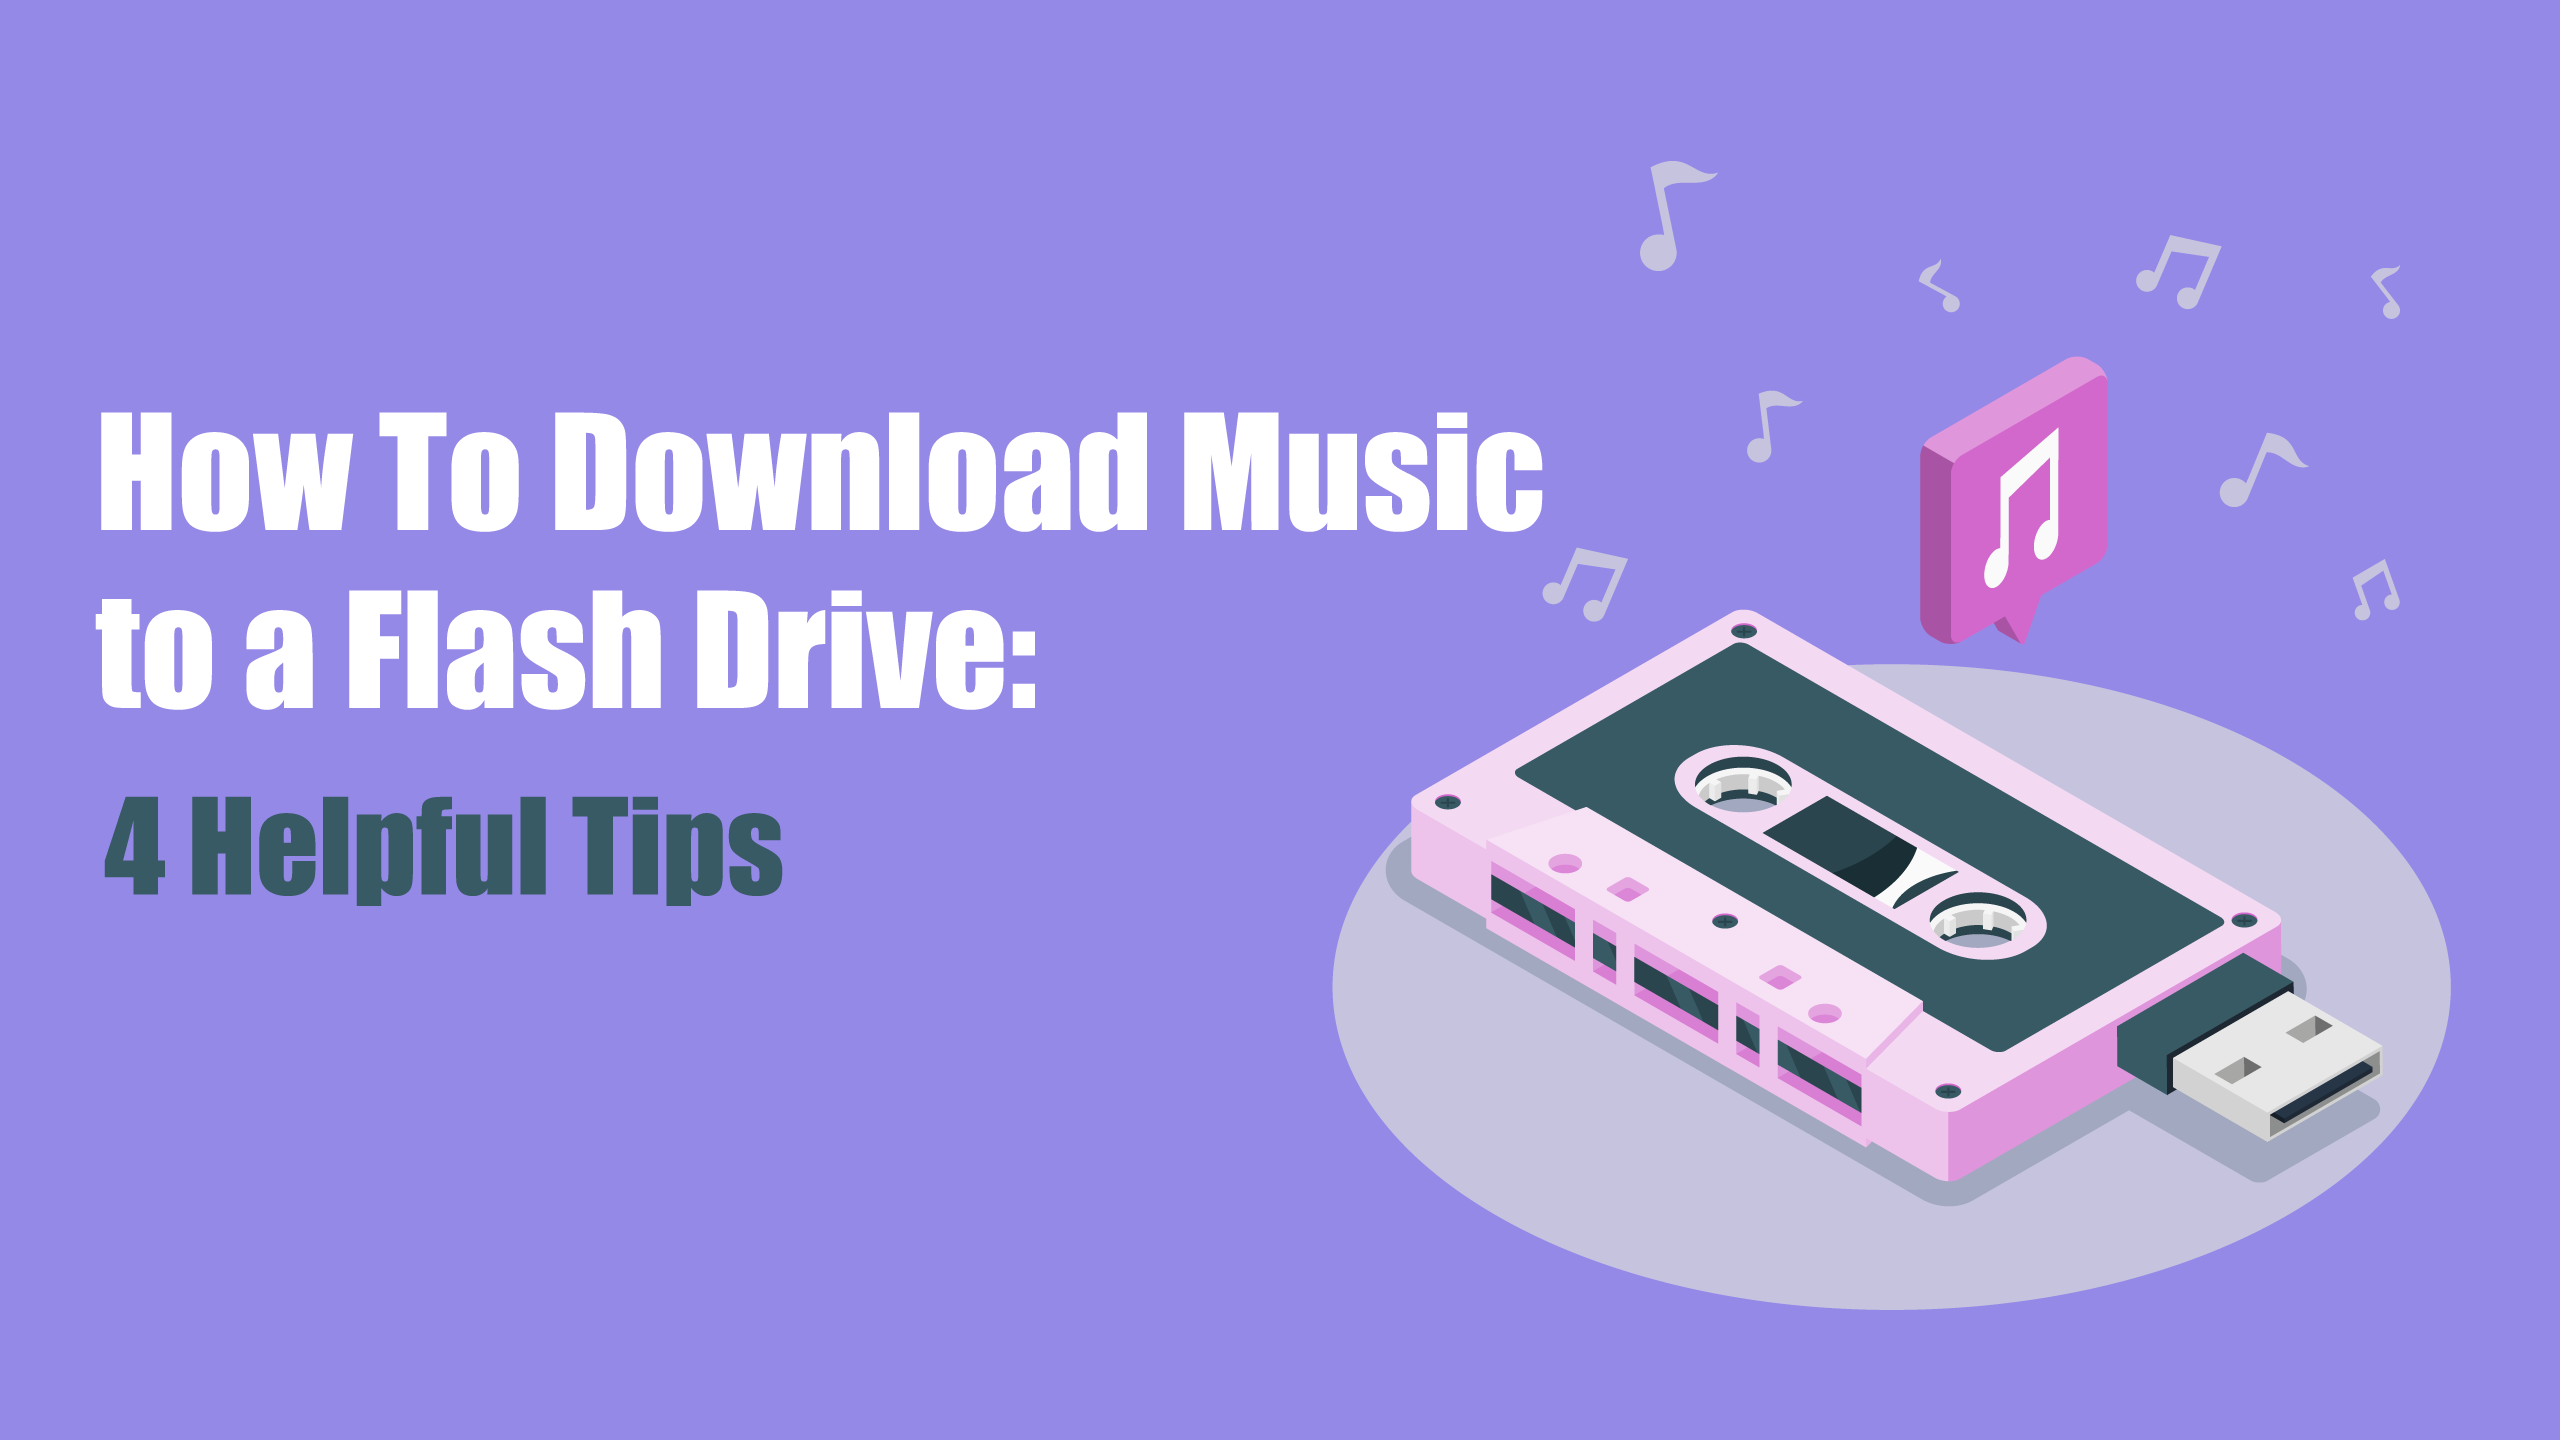 How To Download Music To USB Stick